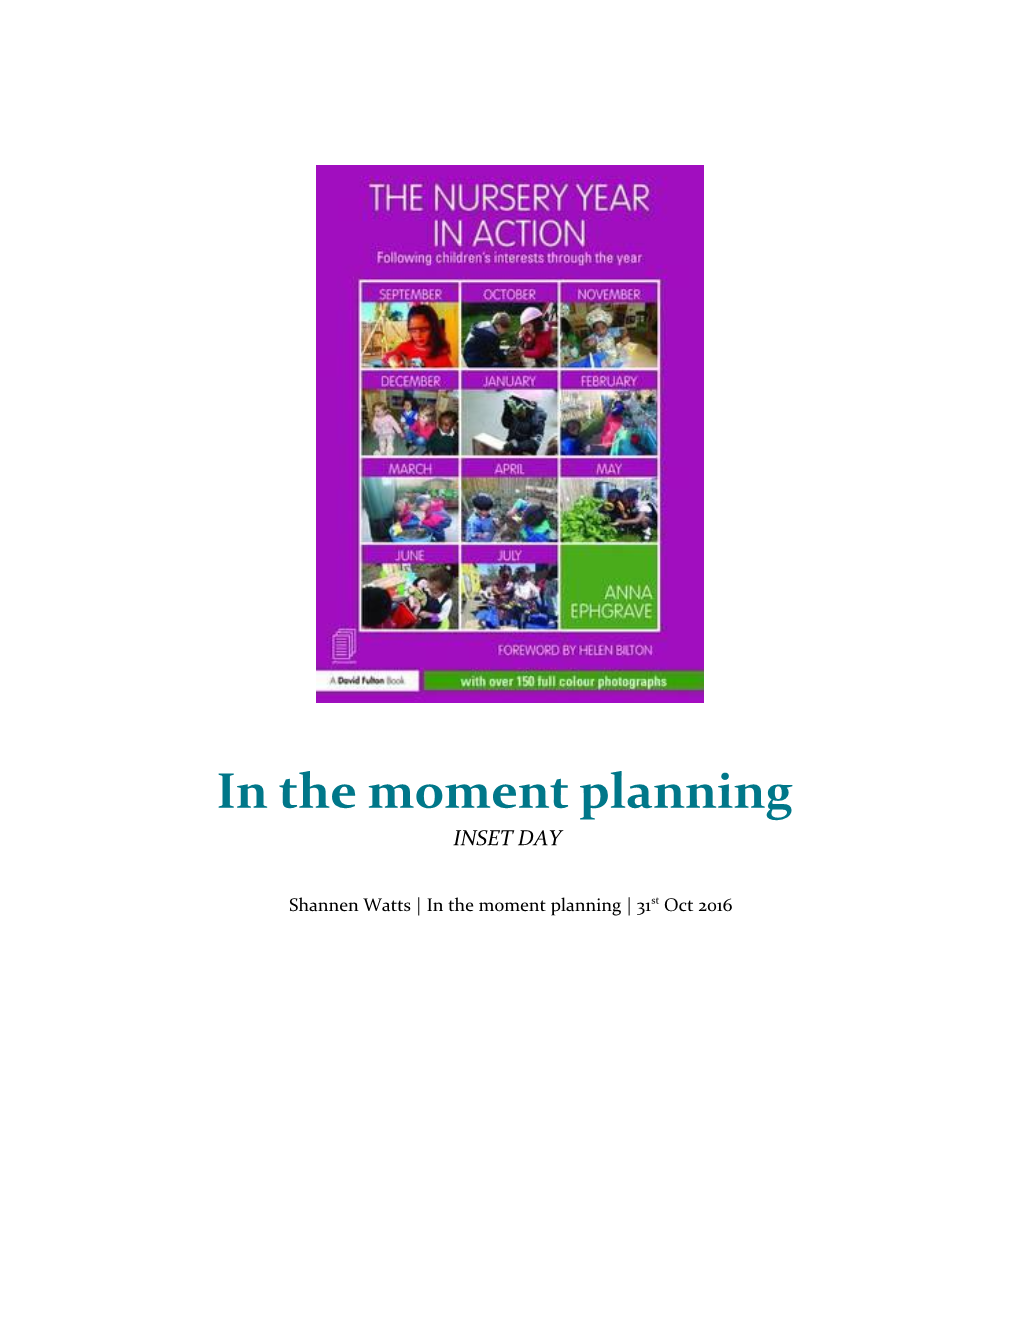 What Does in the Moment Planning Mean to Each Practitioner